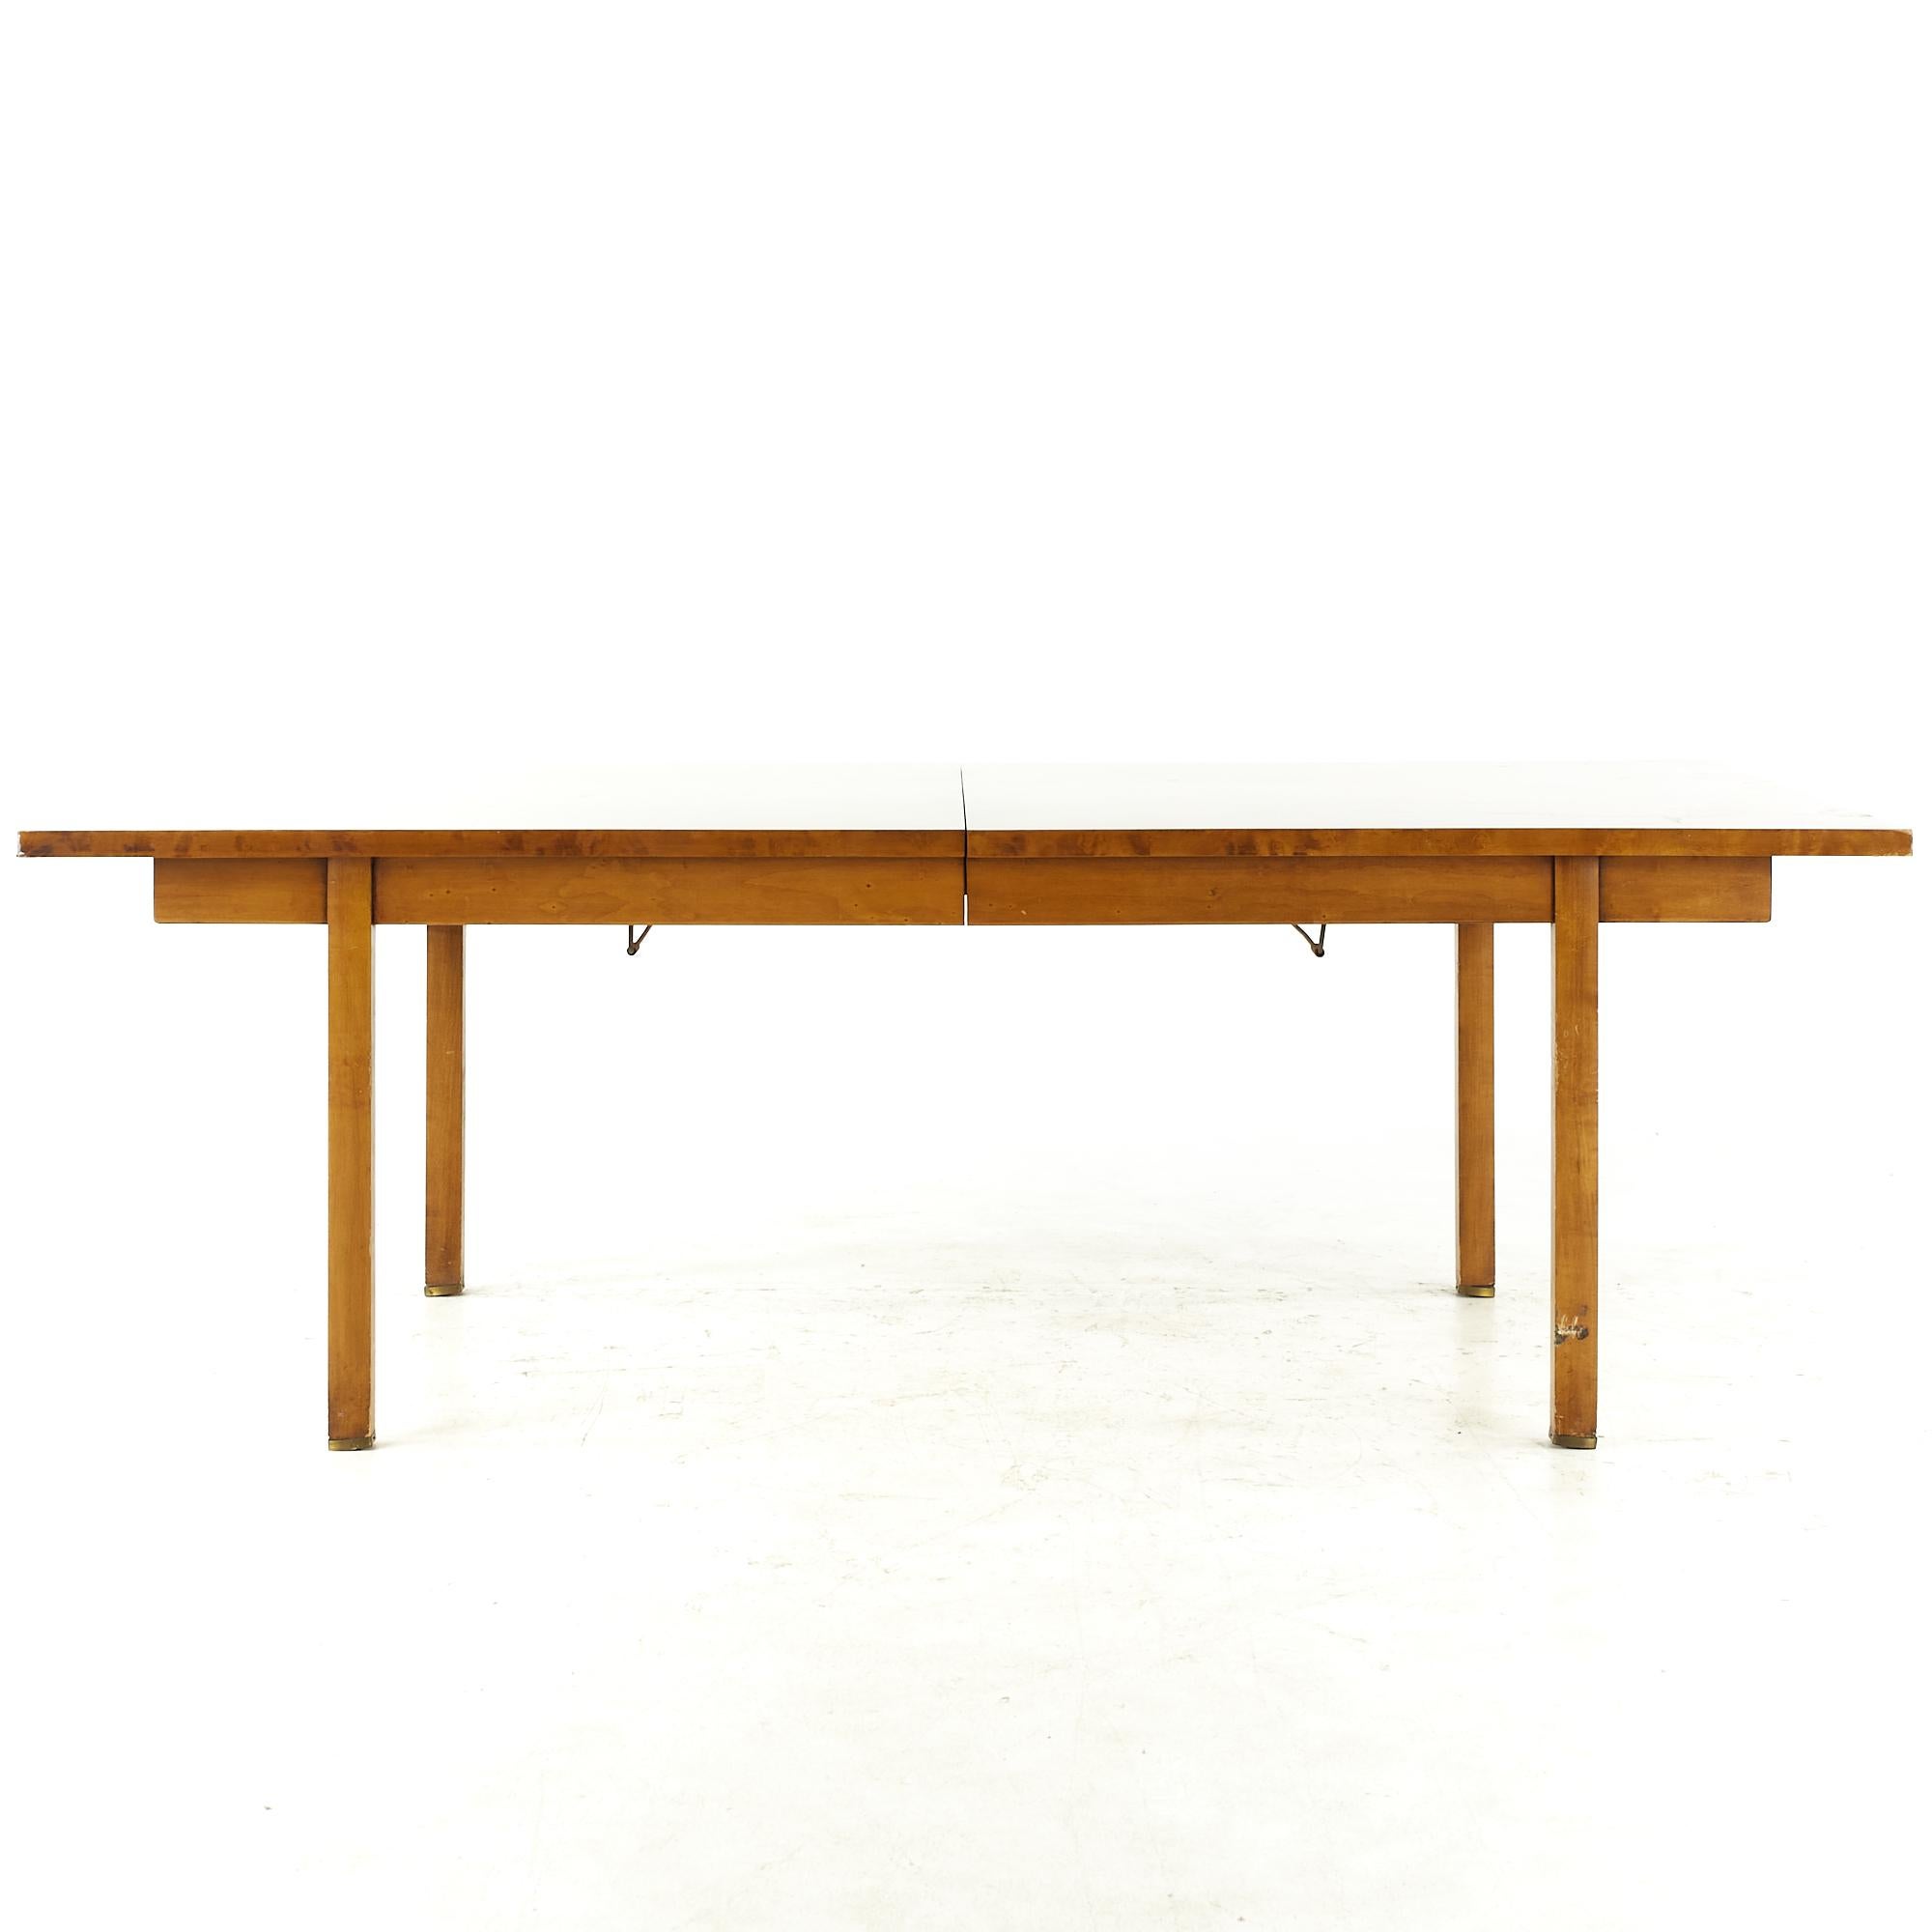 Harold Schwartz for Romweber midcentury Hourglass Burlwood dining table

This table measures: 84.25 wide x 42 deep center/46 deep ends x 28.75 high, with a chair clearance of 24 inches, the leaf measures 18 inches wide, making a maximum table